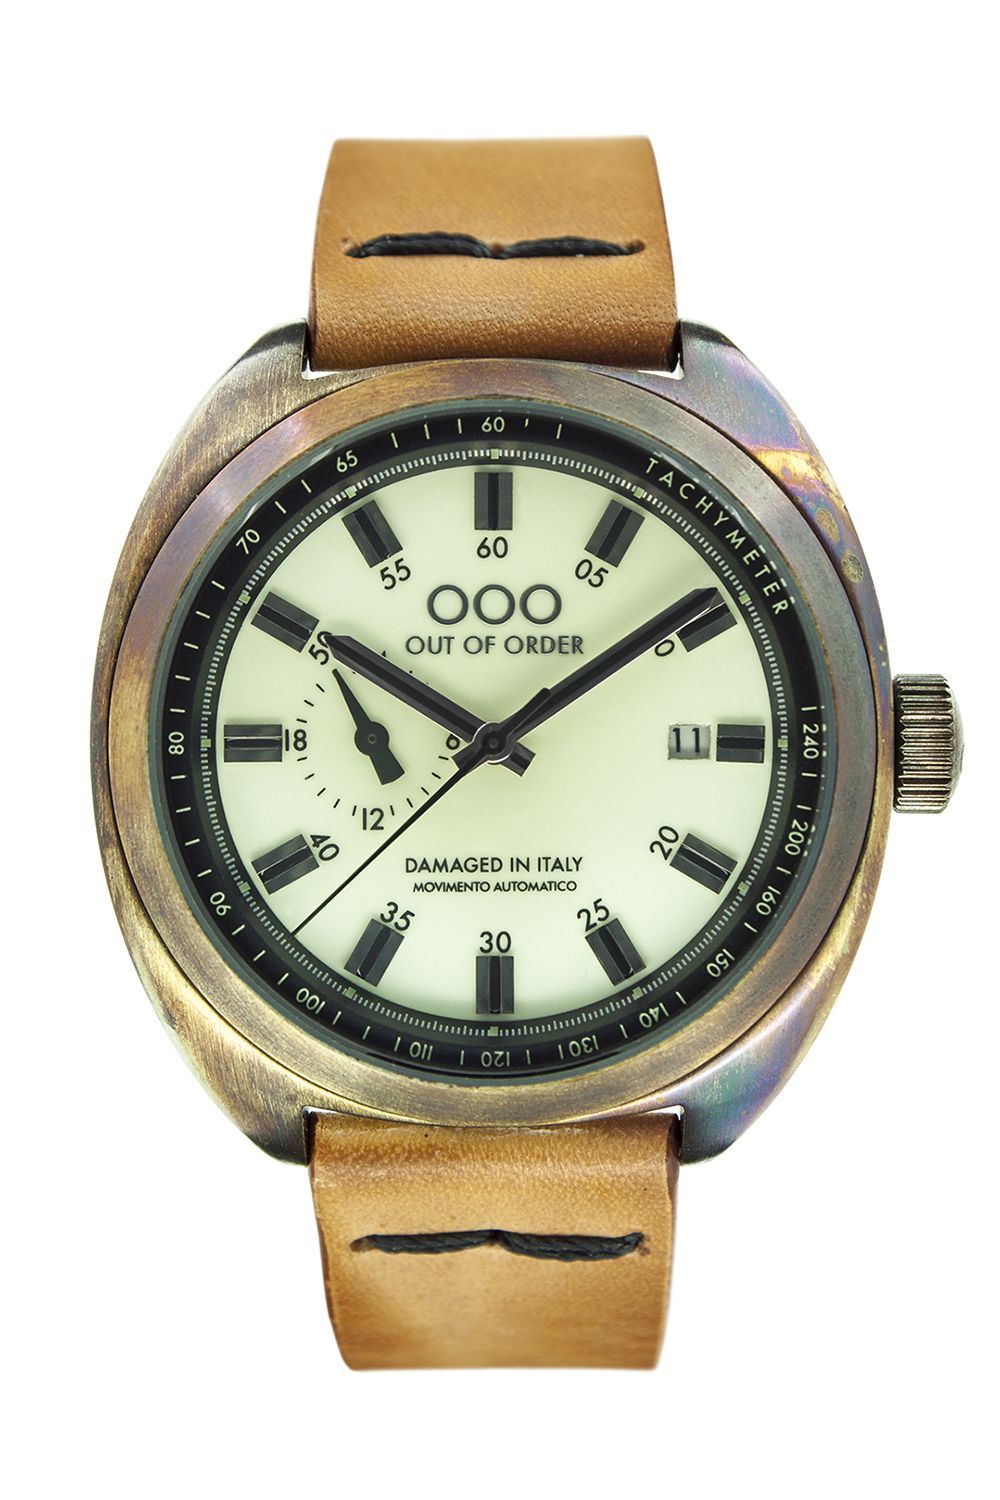 OUT OF ORDER Torpedine Brown Leather Strap